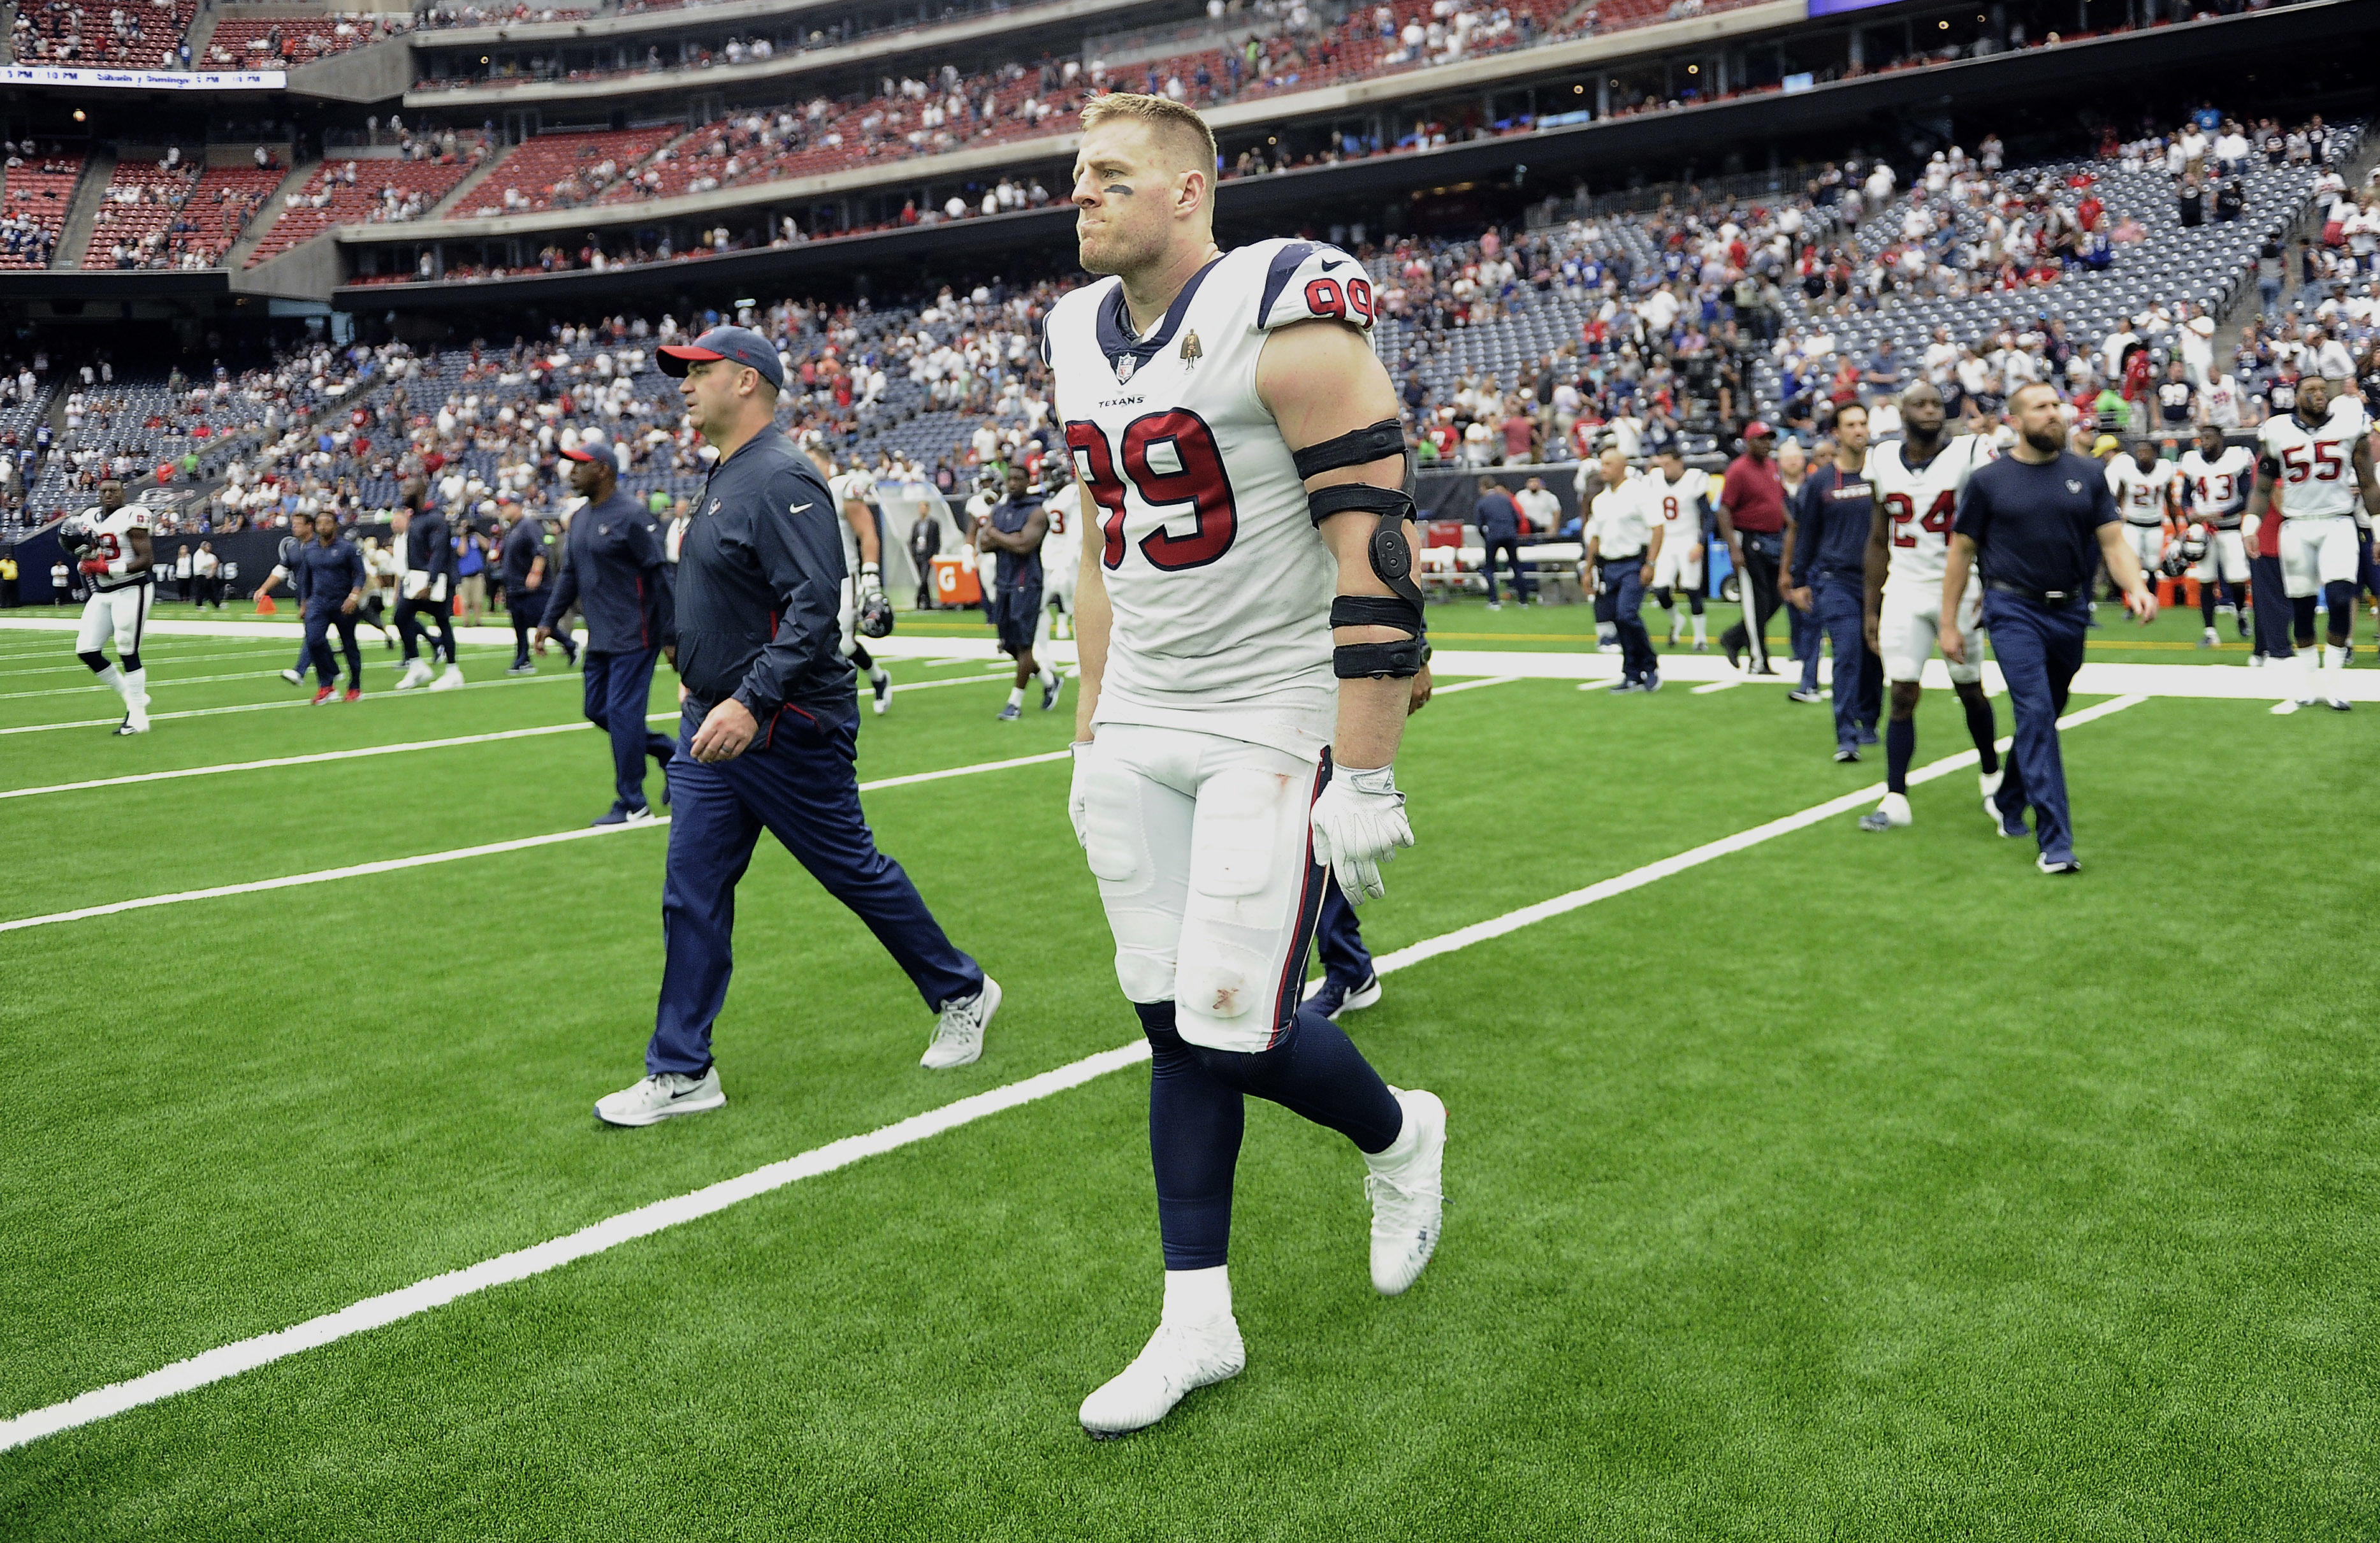 Winless Texans search for ways to turn things around